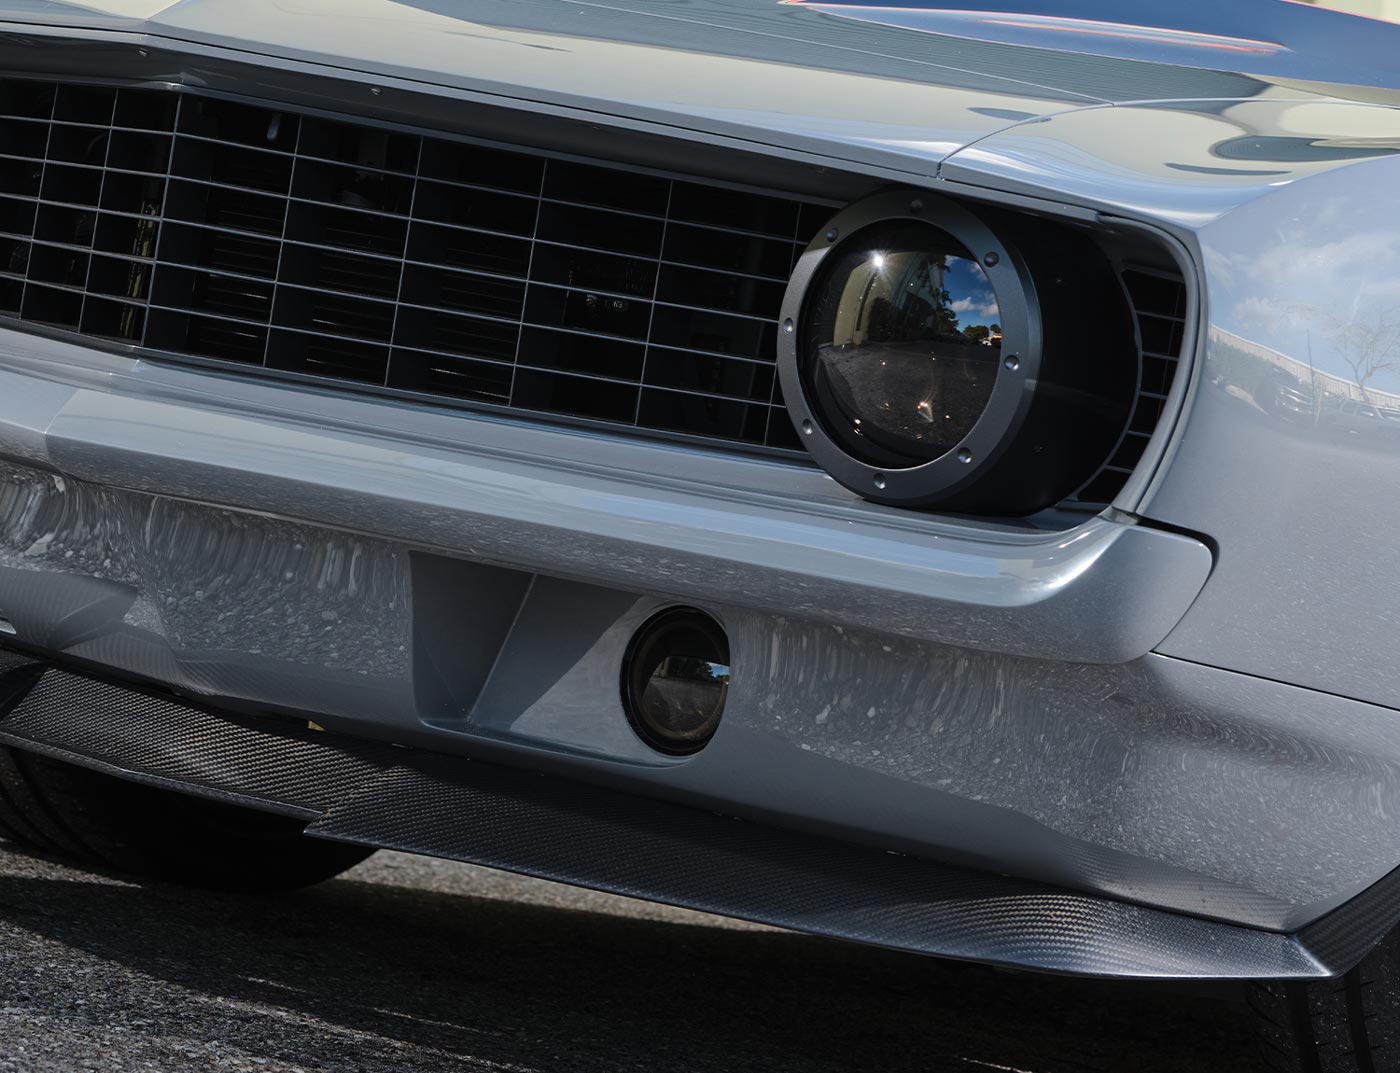 '69 Camaro driver's side headlight and grille